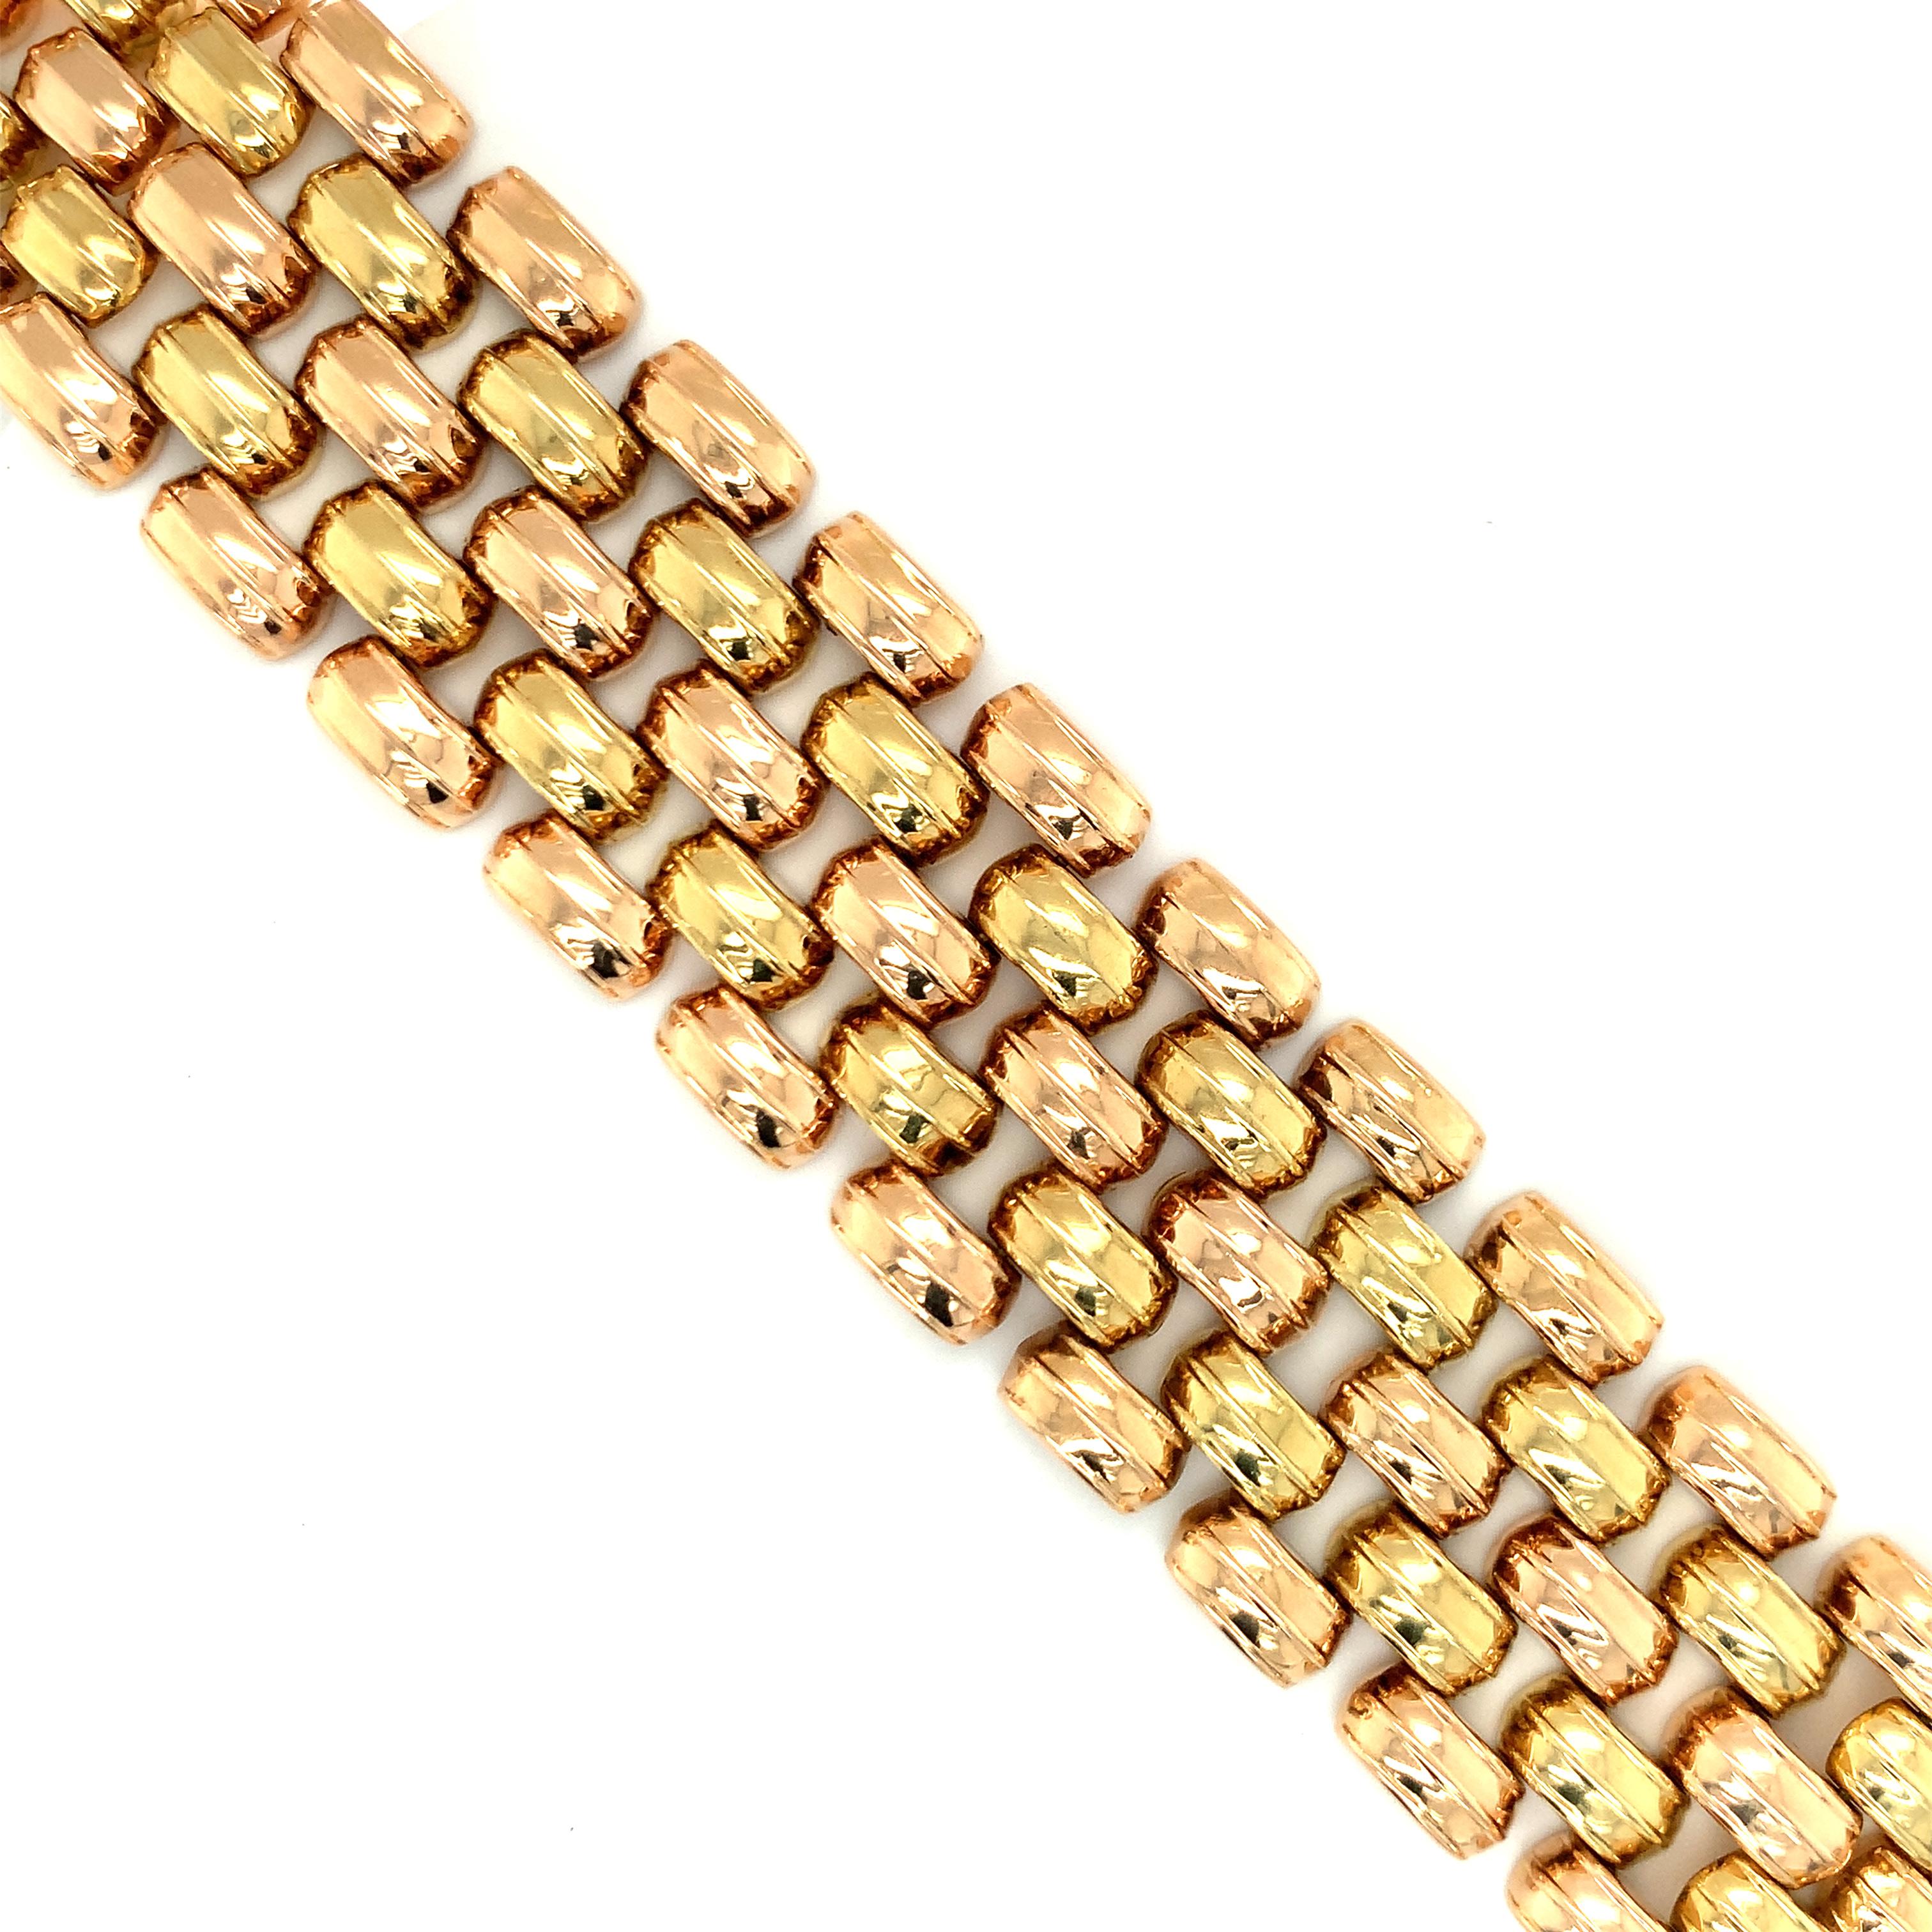 One Retro 18K tri-color gold wide-strap bracelet featuring rose, yellow, and green gold fluted oval links with a high polish finish. Flexible, comfortable, and made with bold design.

Flash, statement, hefty.

Metal: 18K yellow gold
Circa: Retro,